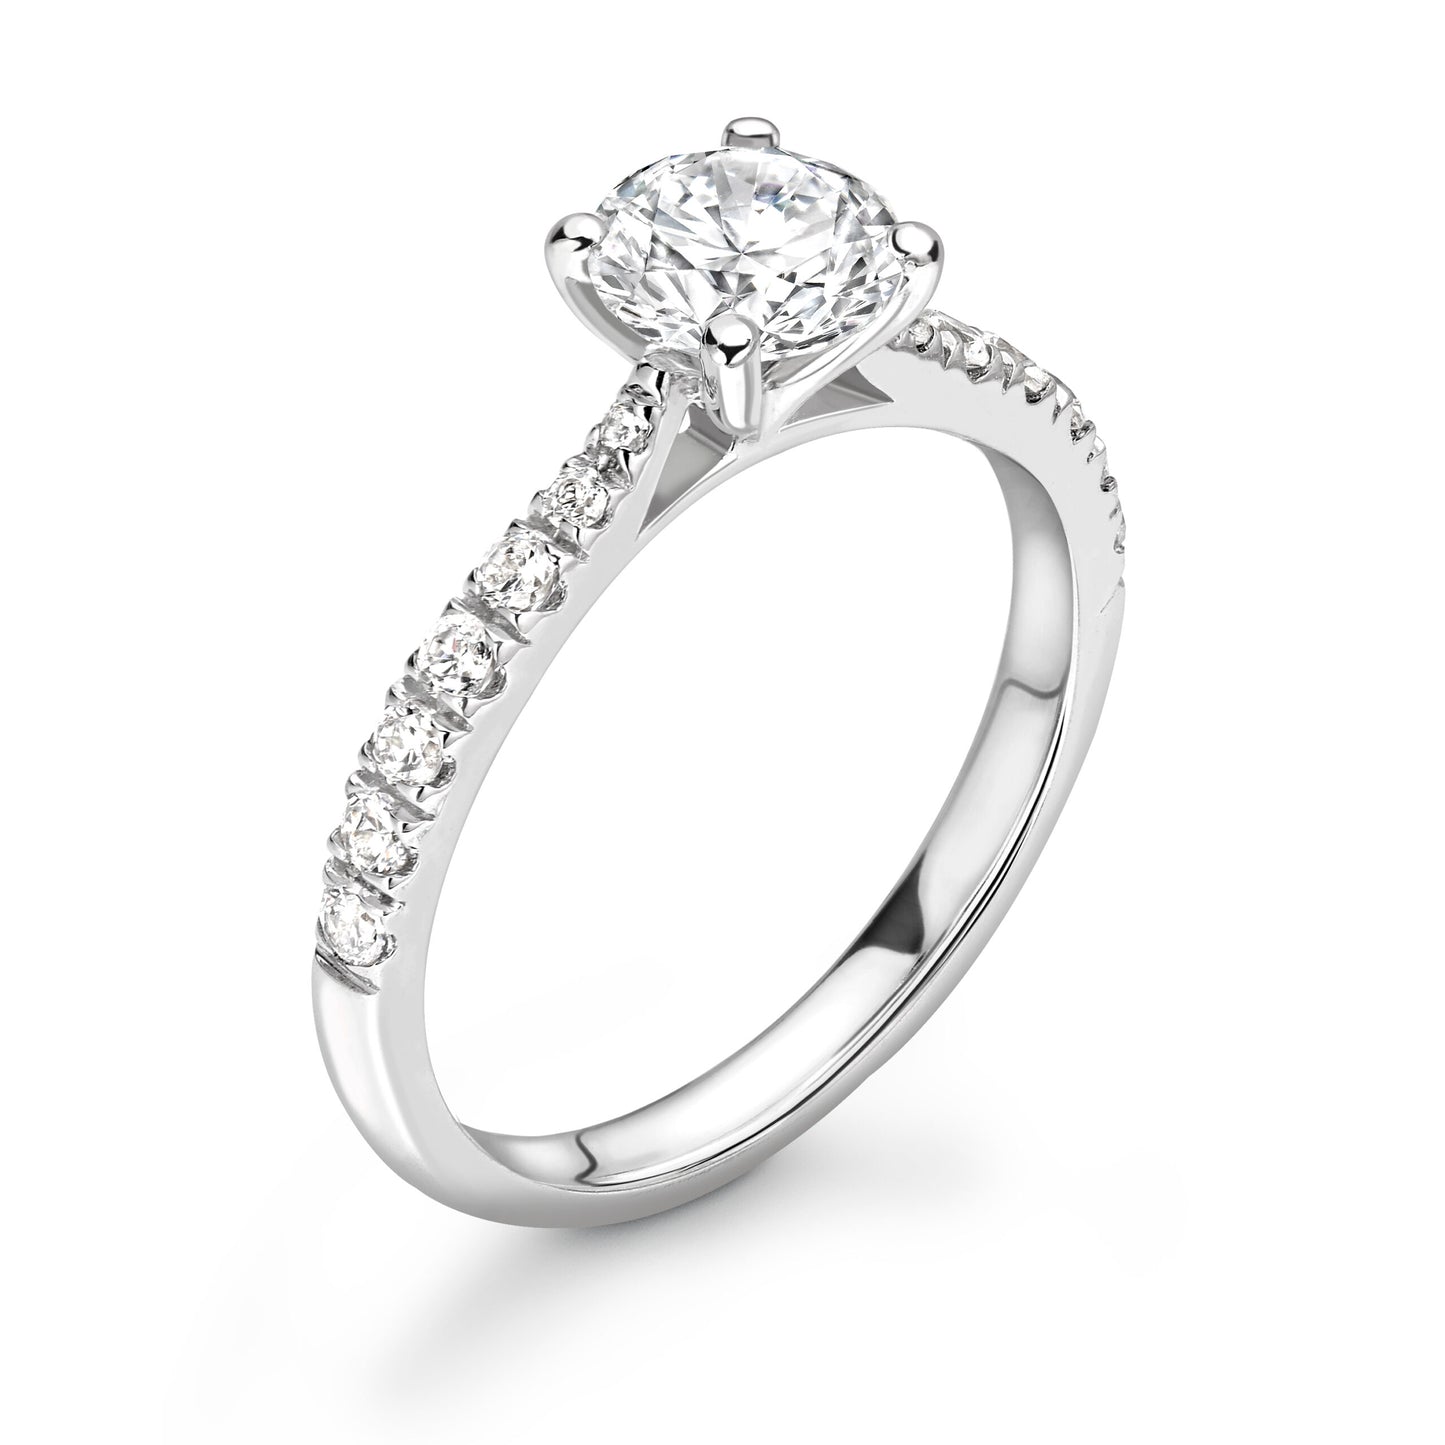 Round Pave Diamond ring in White Gold